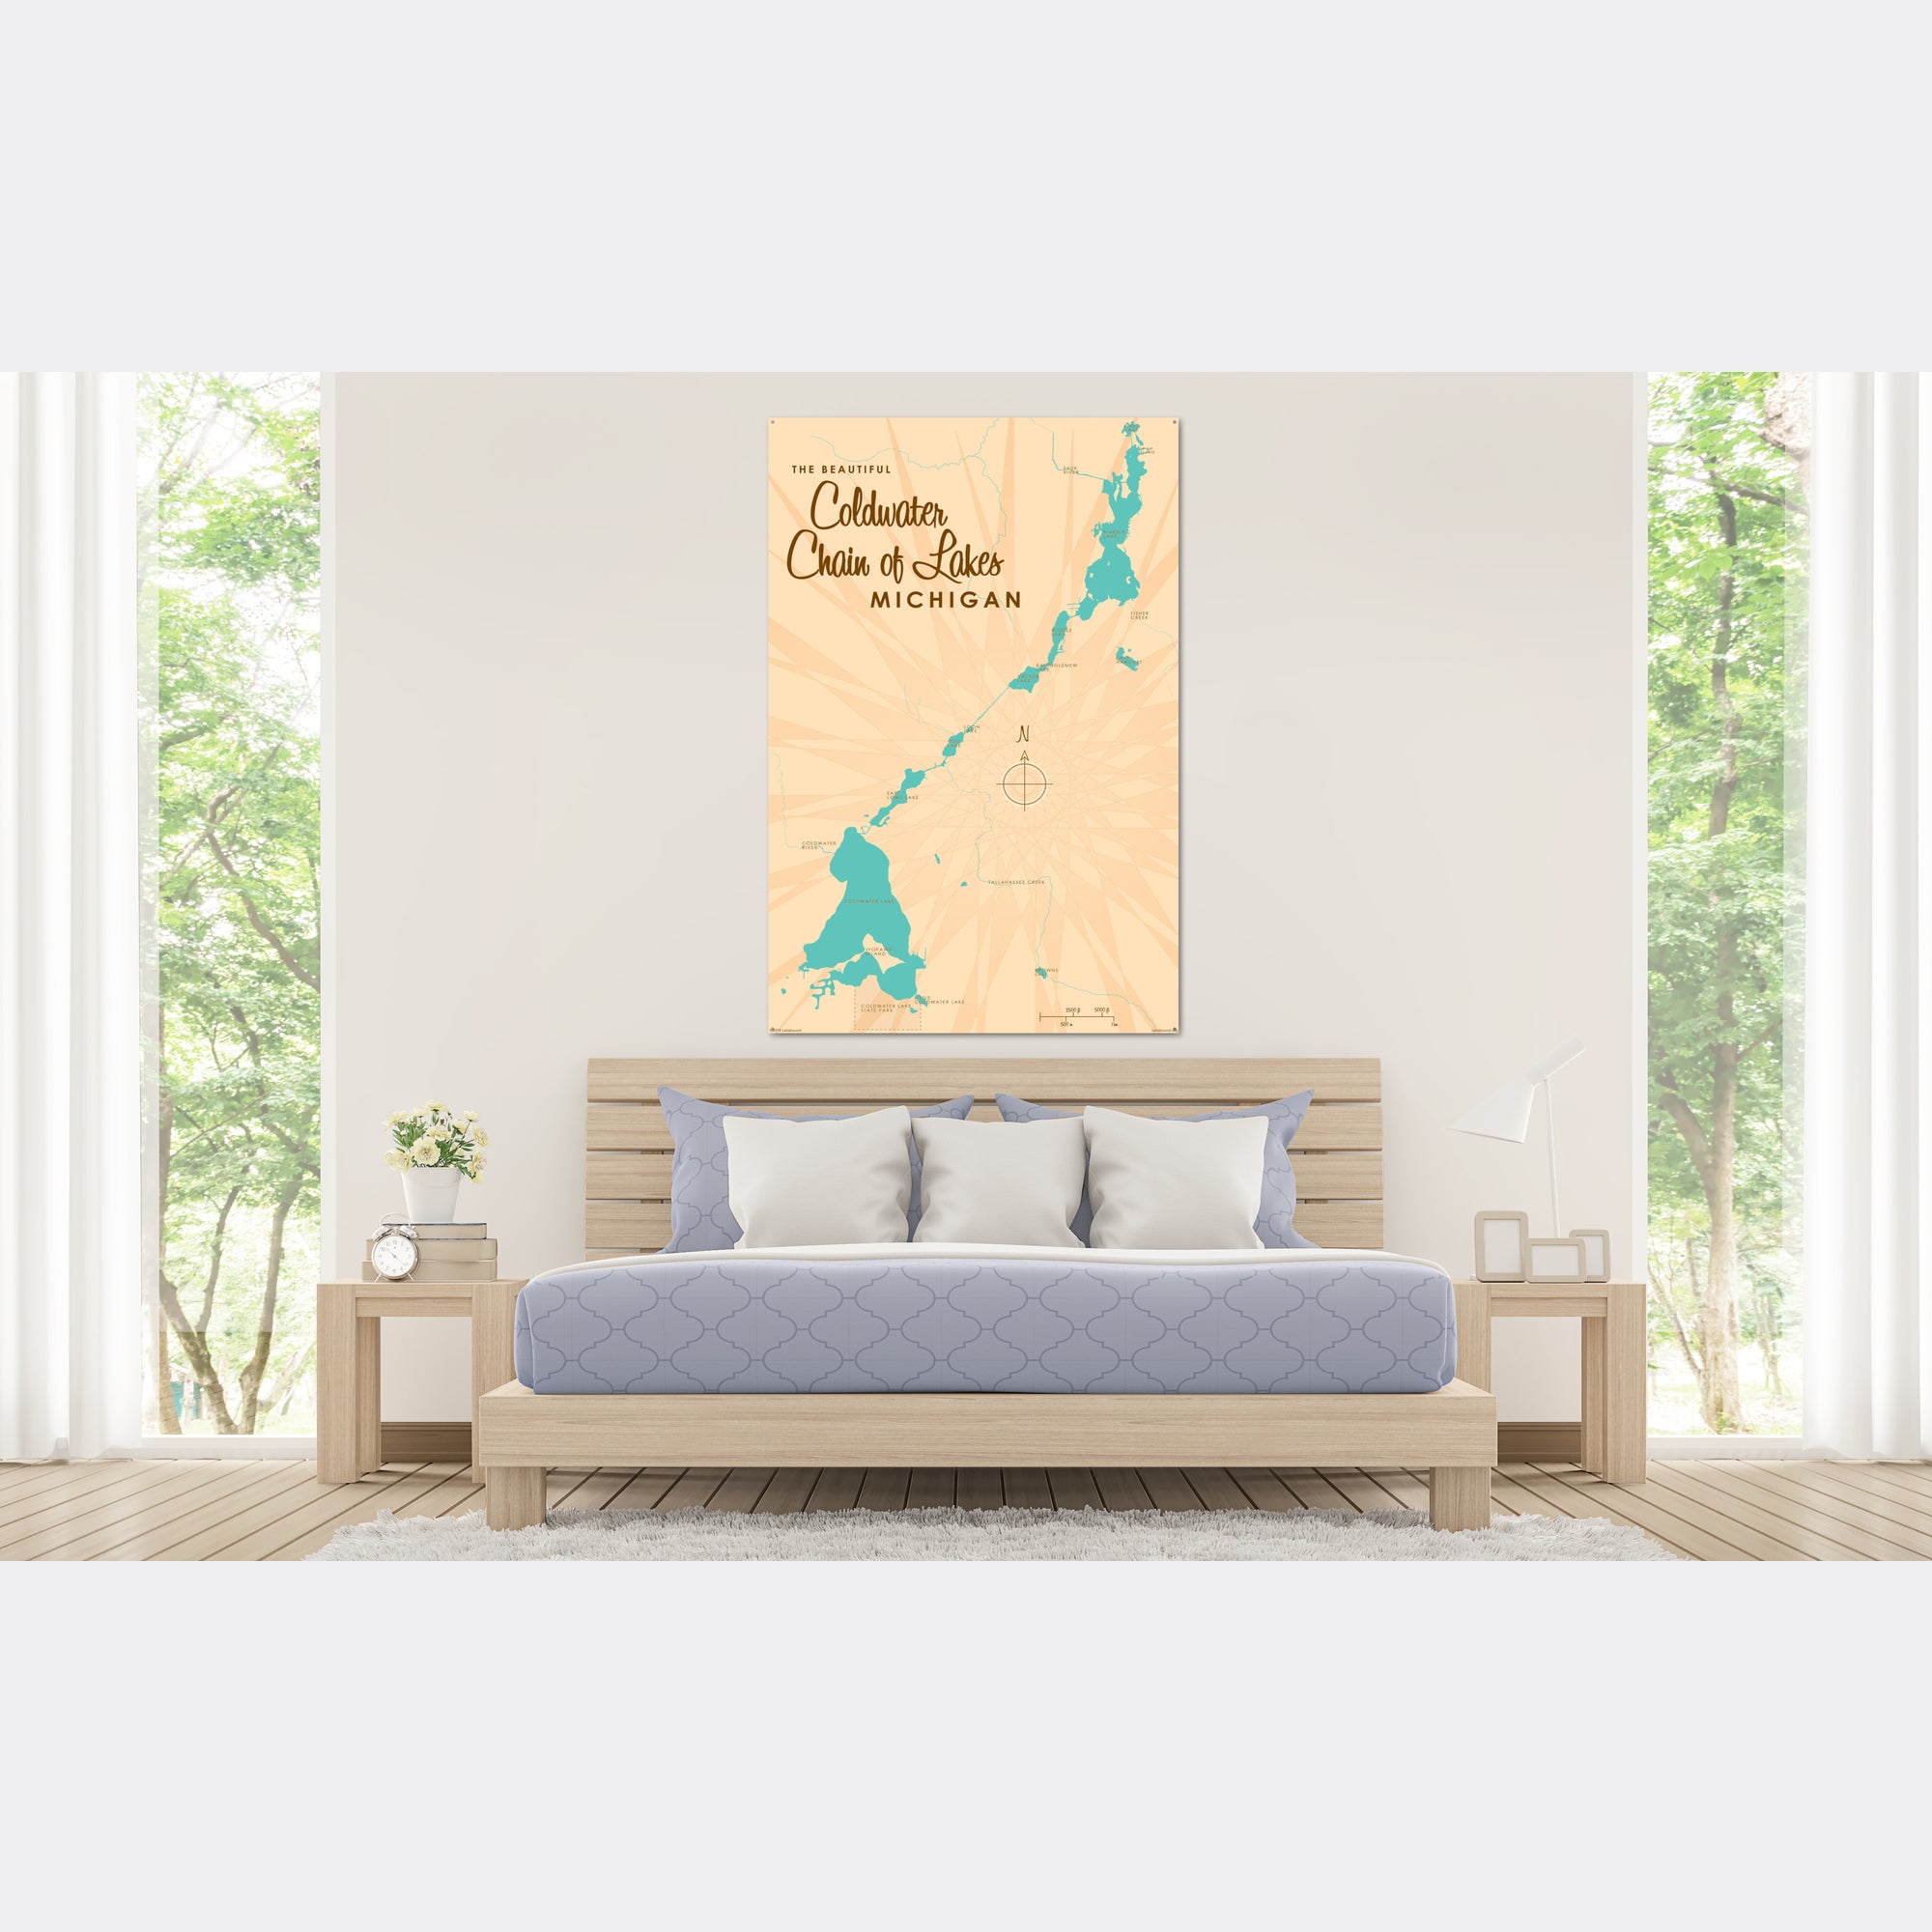 Coldwater Chain of Lakes Michigan, Metal Sign Map Art